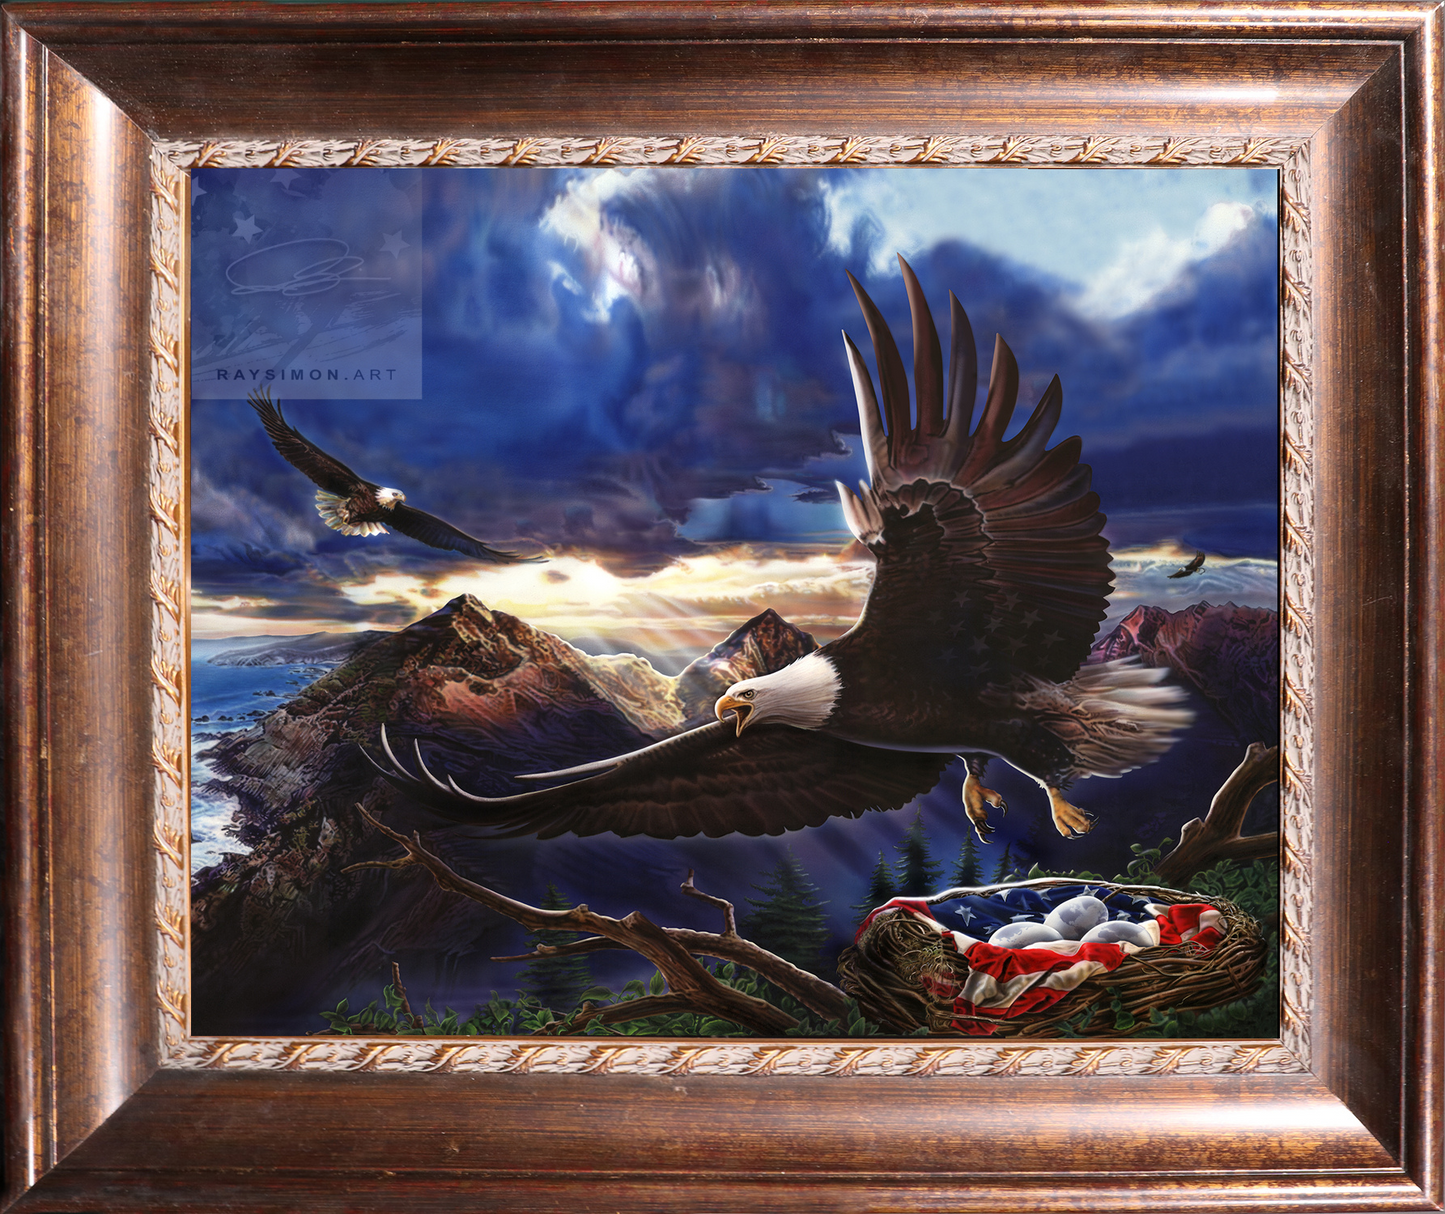 American Bald Eagle Painting - 'Generations of Freedom'